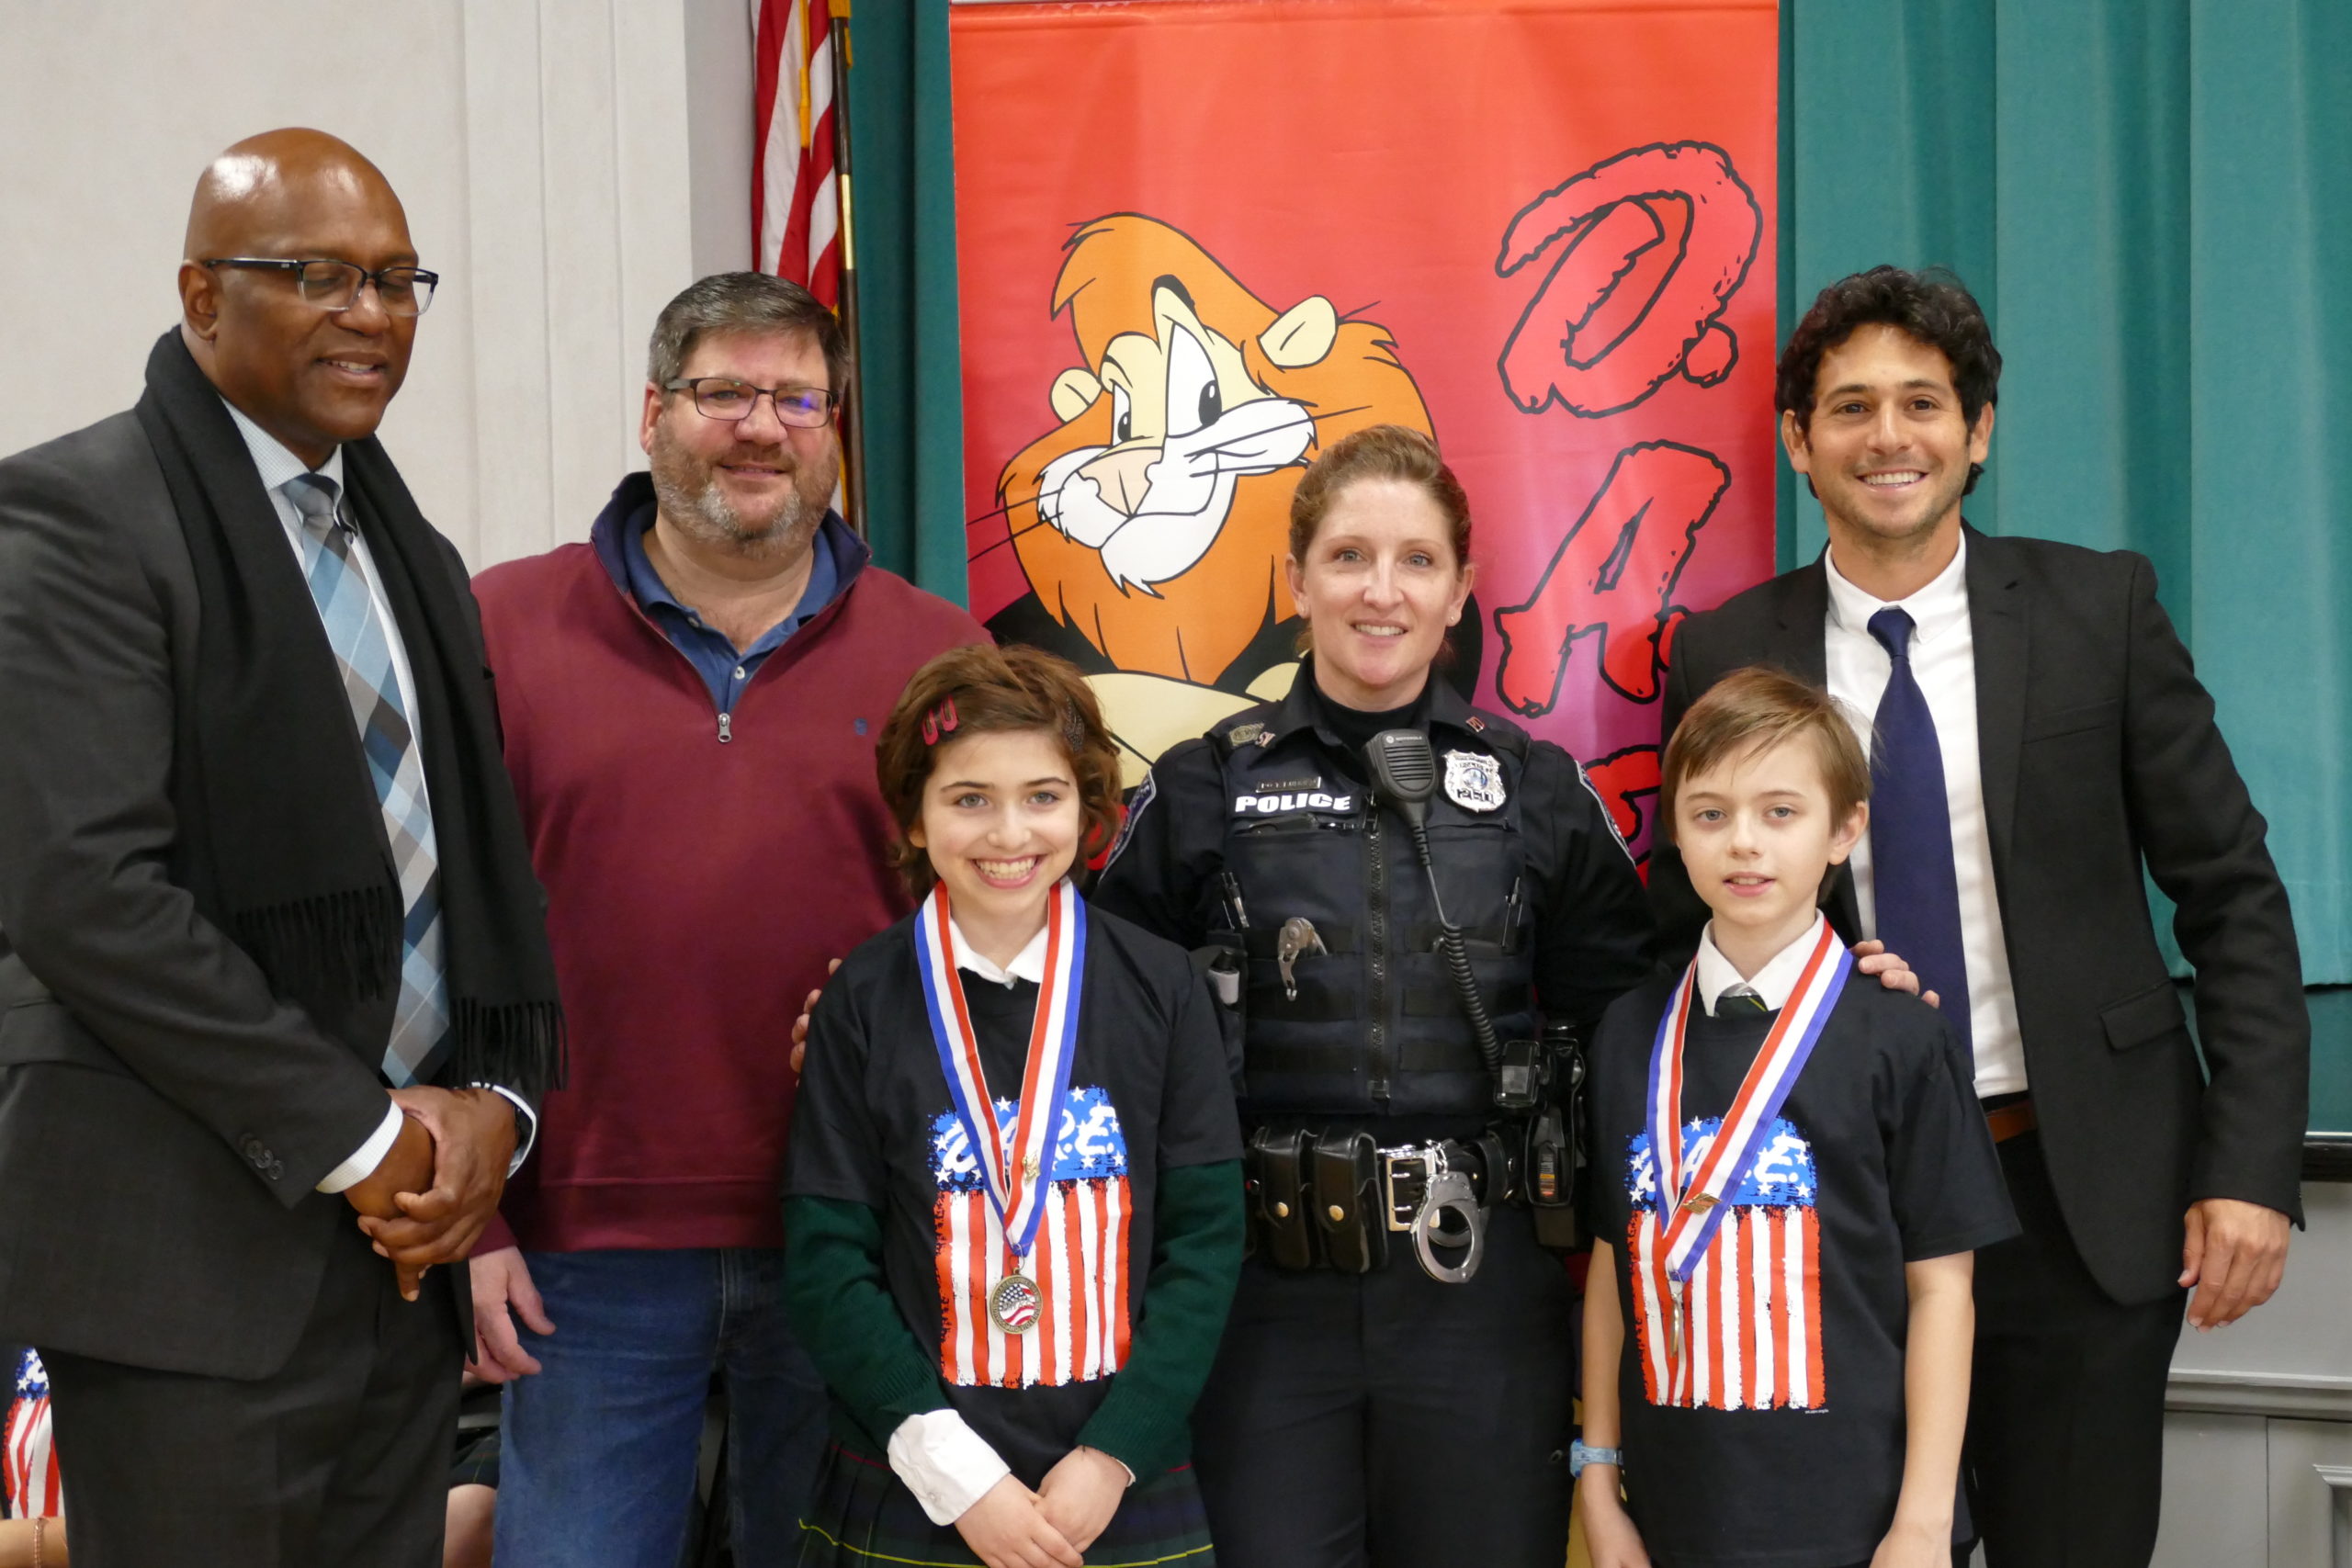 Southampton Police Officer Tiffany Lubold presented Our Lady of the Hamptons School fifth-graders with certificates of completion at the DARE graduation on January 10. Also attending the ceremony were Southampton Village Mayor Jesse Warren, right,  Southampton Village Police Detective Herman Lamison, left, and Southampton Village Trustee Richard Yastrzemski. Essay contest winners Lucy Tillotson and Oliver Nielsen read their essays on the lessons learned in the program.